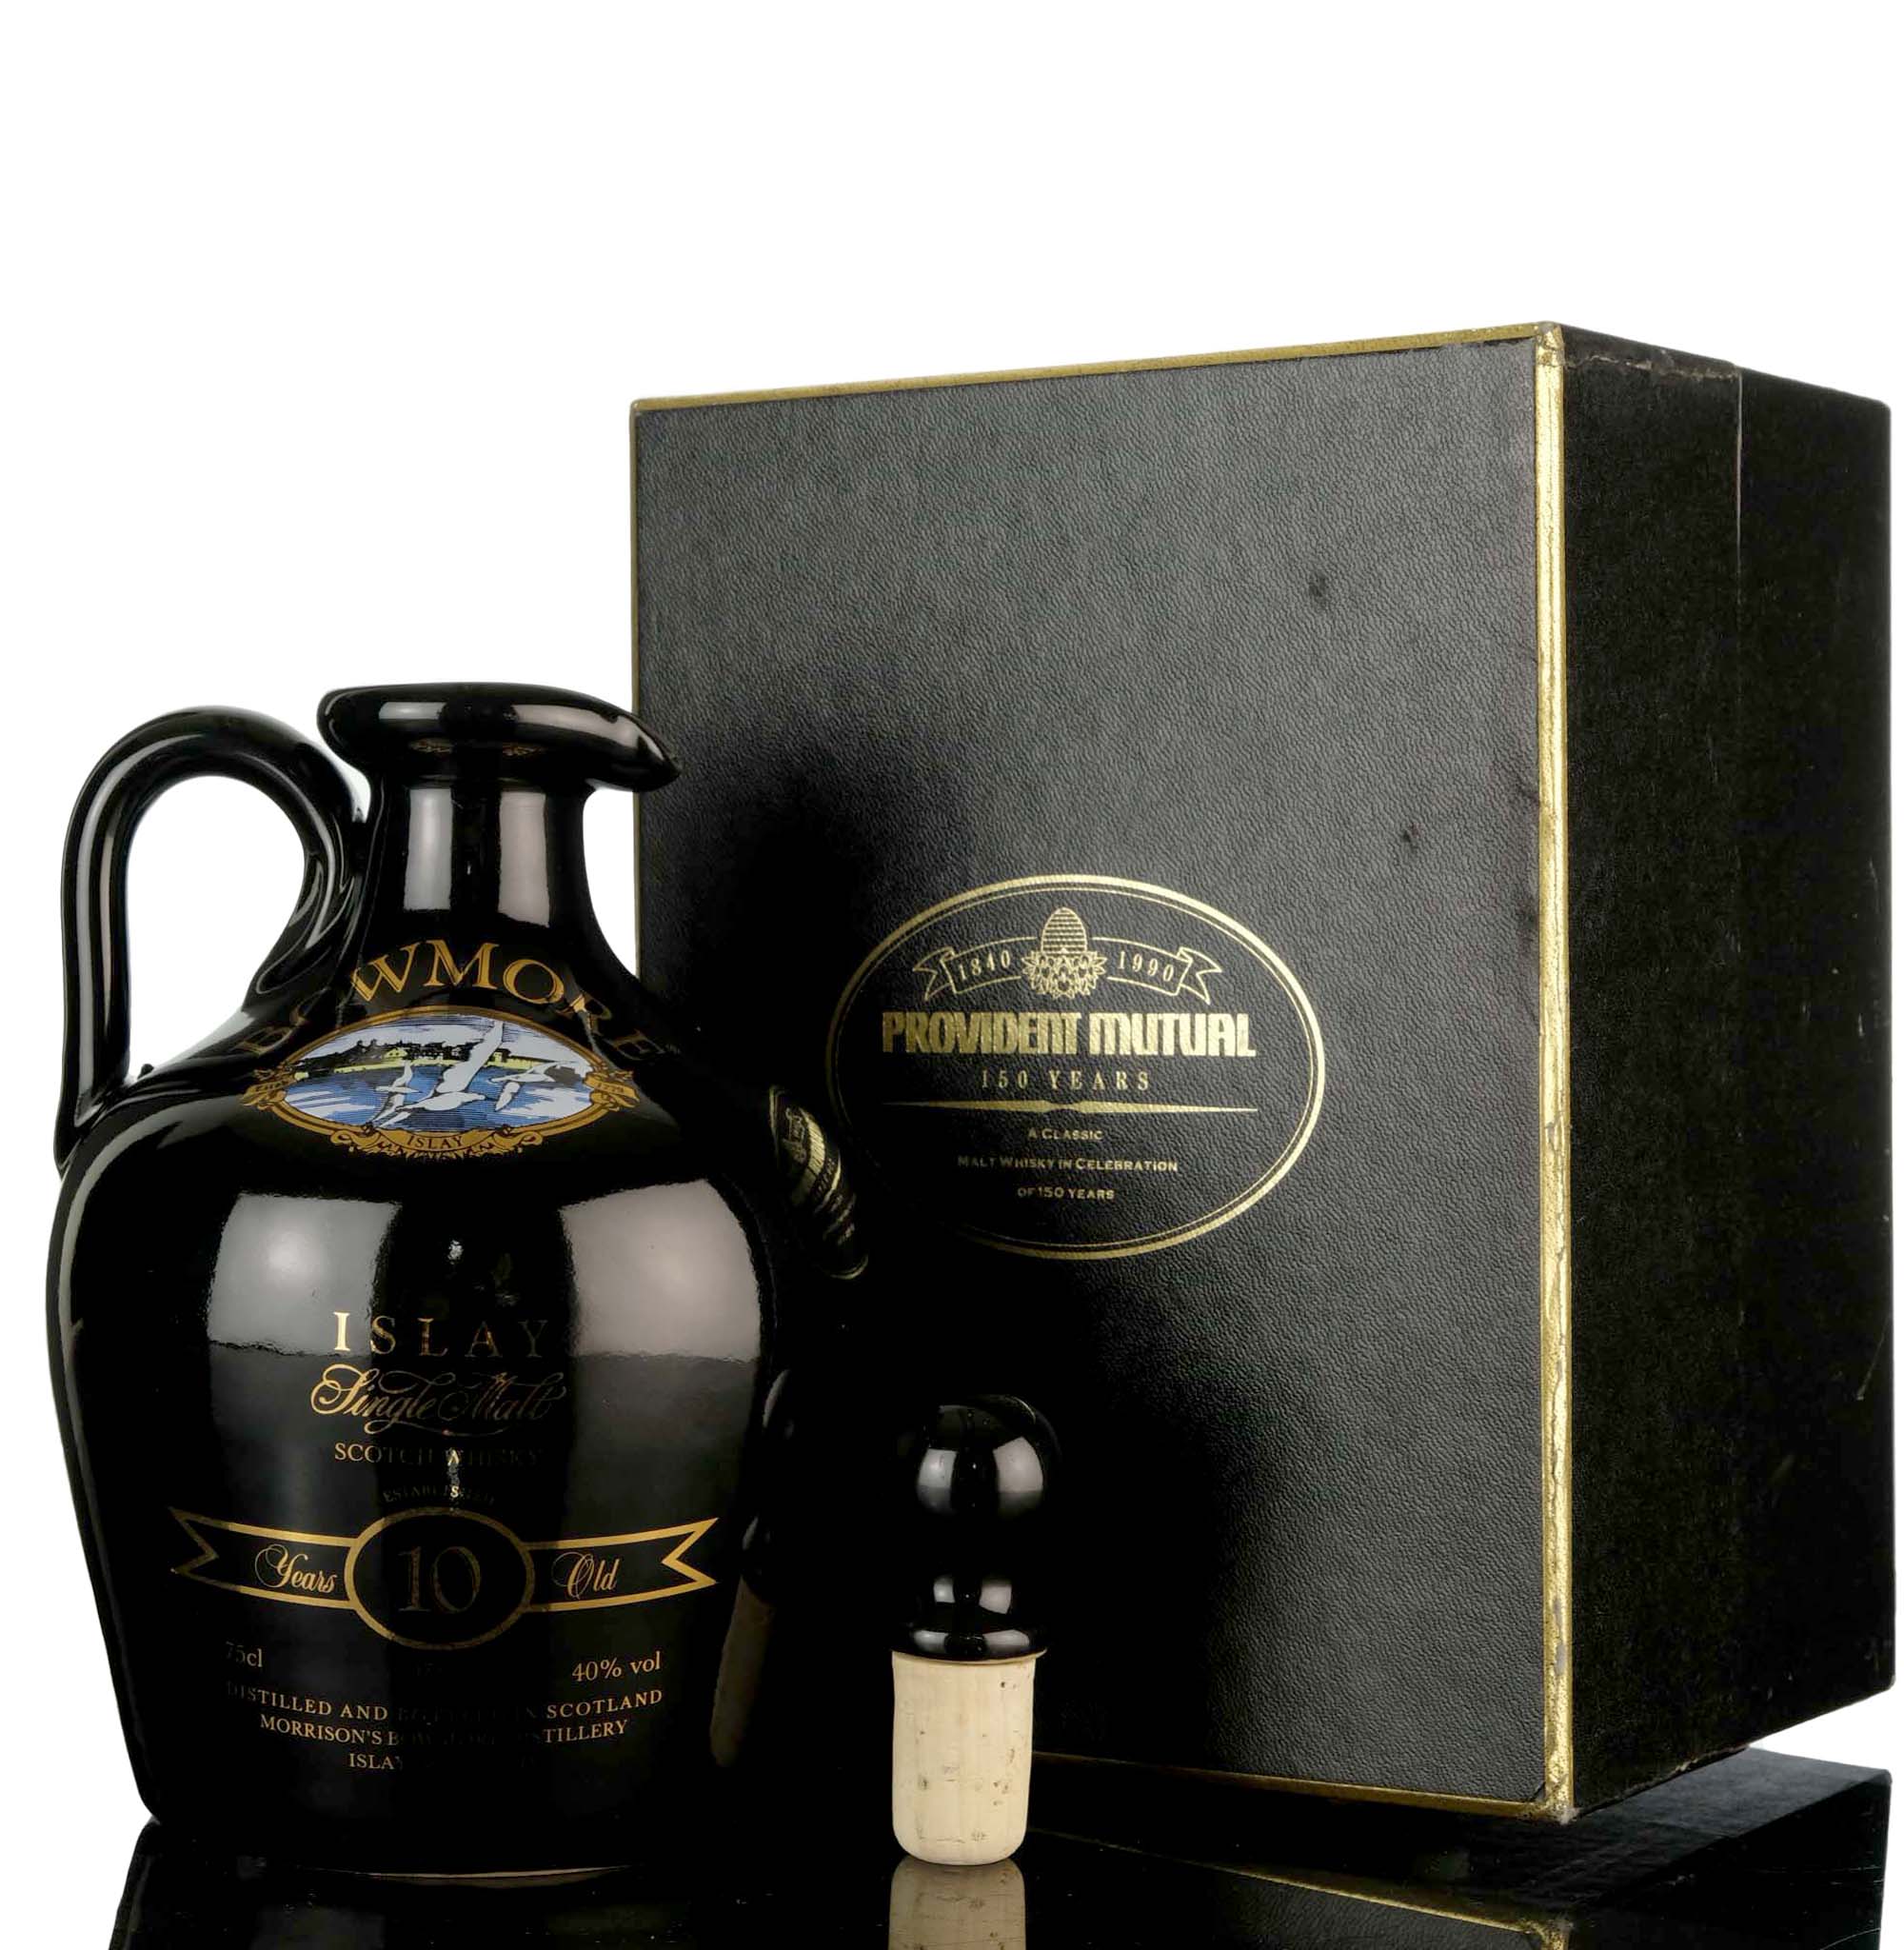 Bowmore 10 Year Old - Provident Mutual 150th Anniversary 1840-1990 - Ceramic